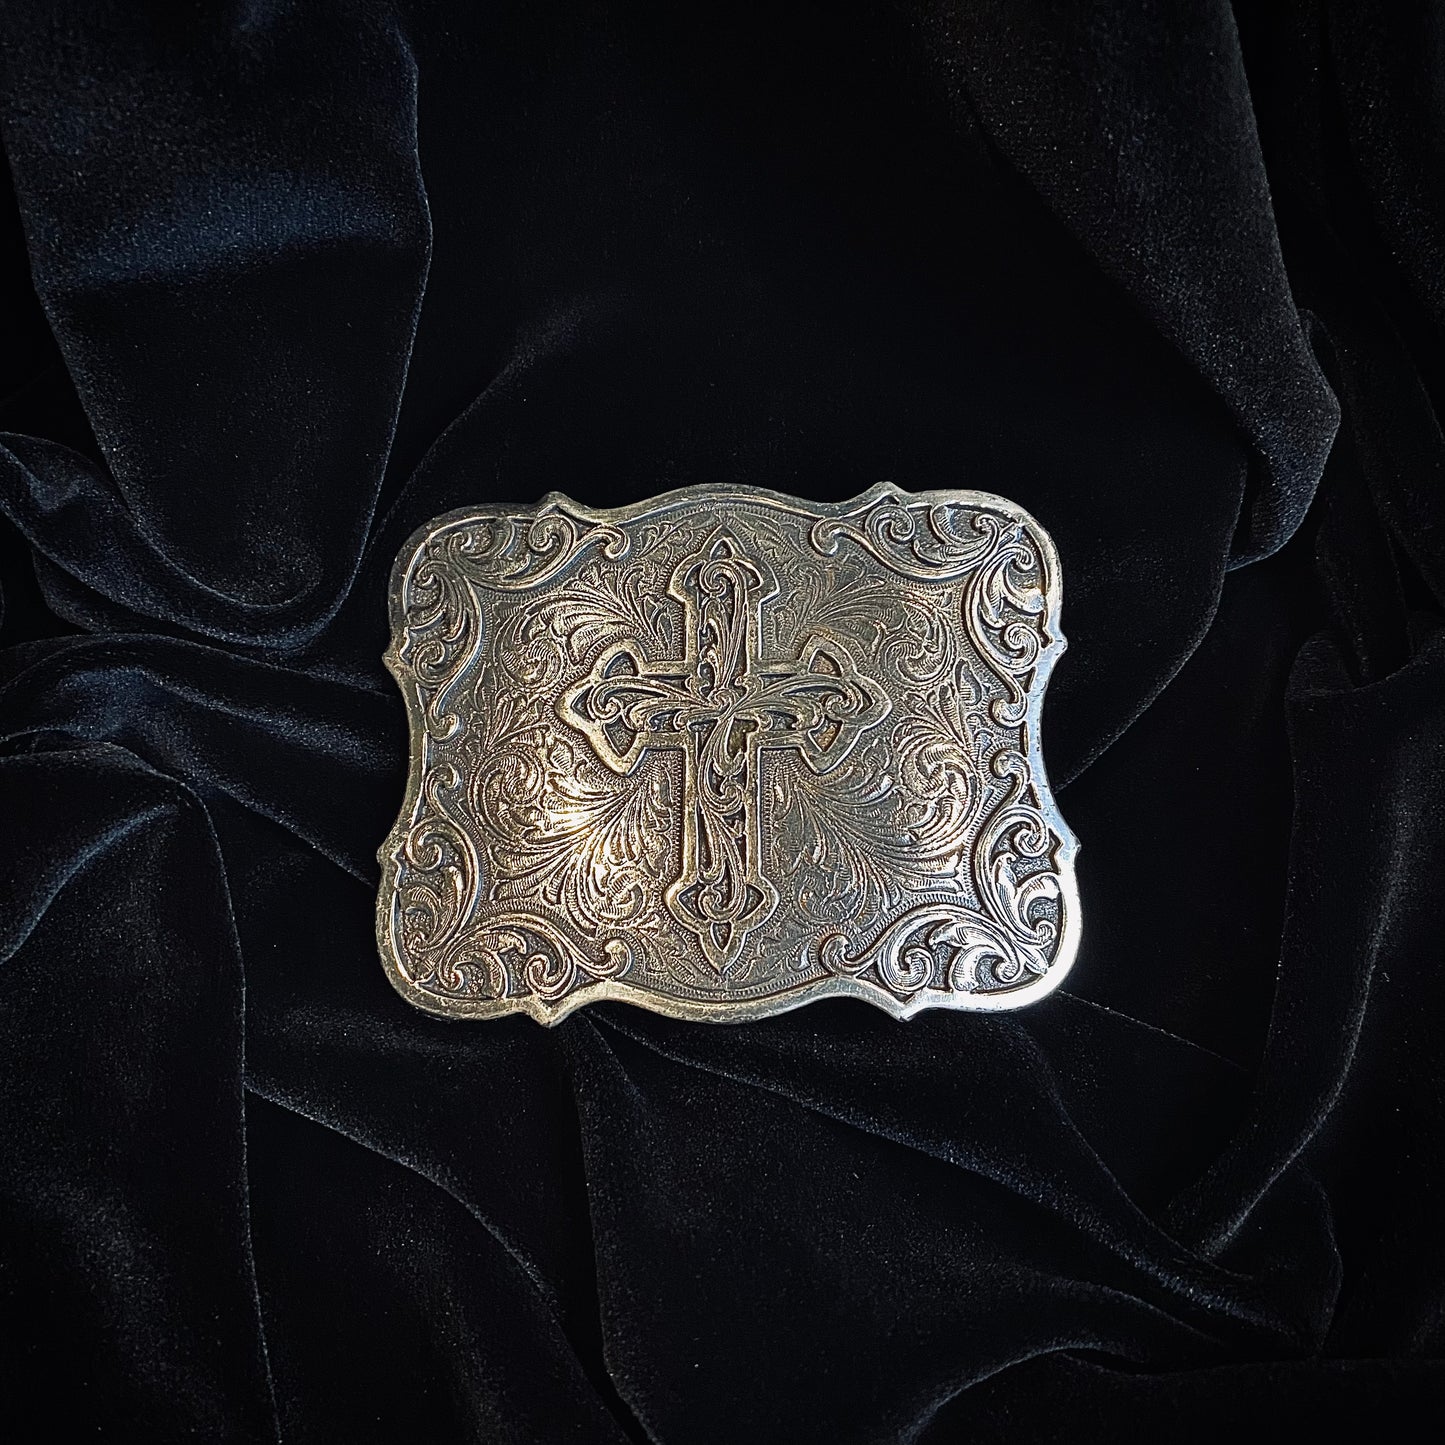 Stainless Steel Ornate Crucifix Engraved Belt Buckle